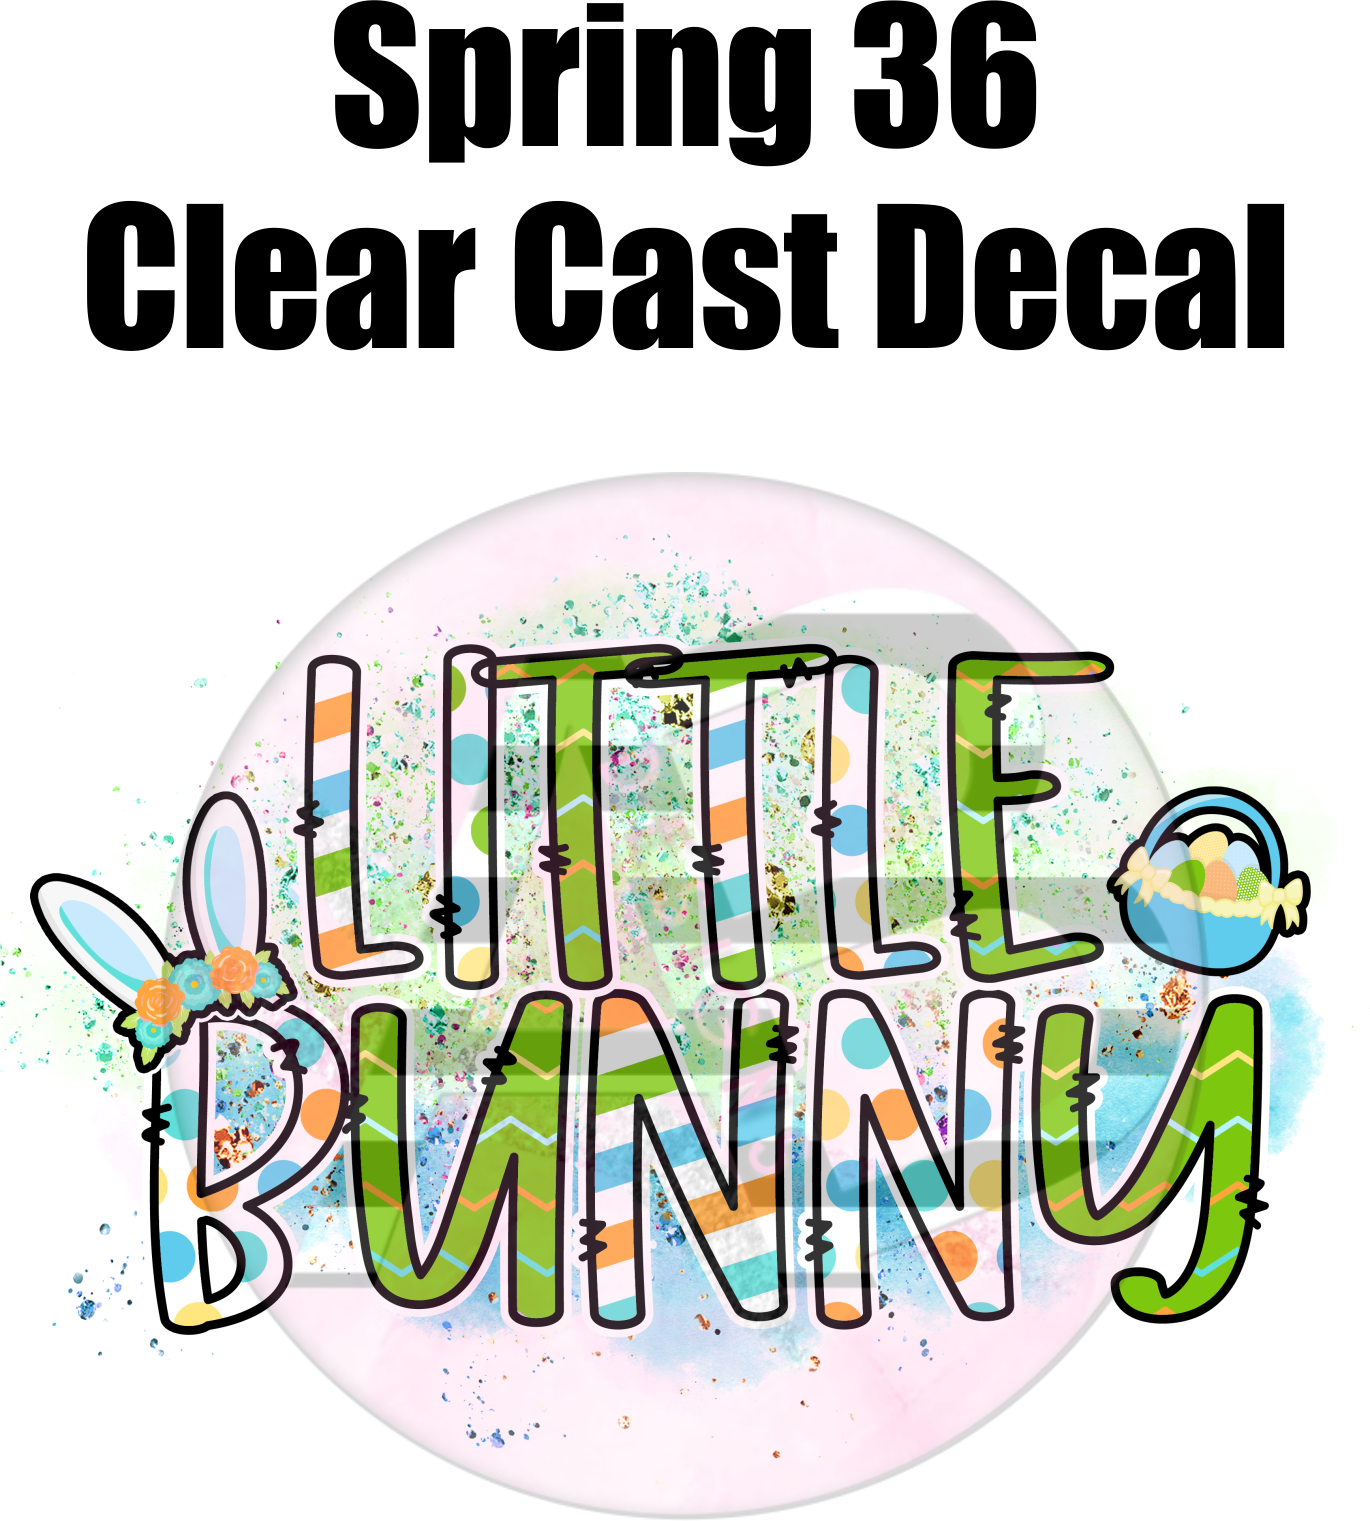 Spring 36 - Clear Cast Decal